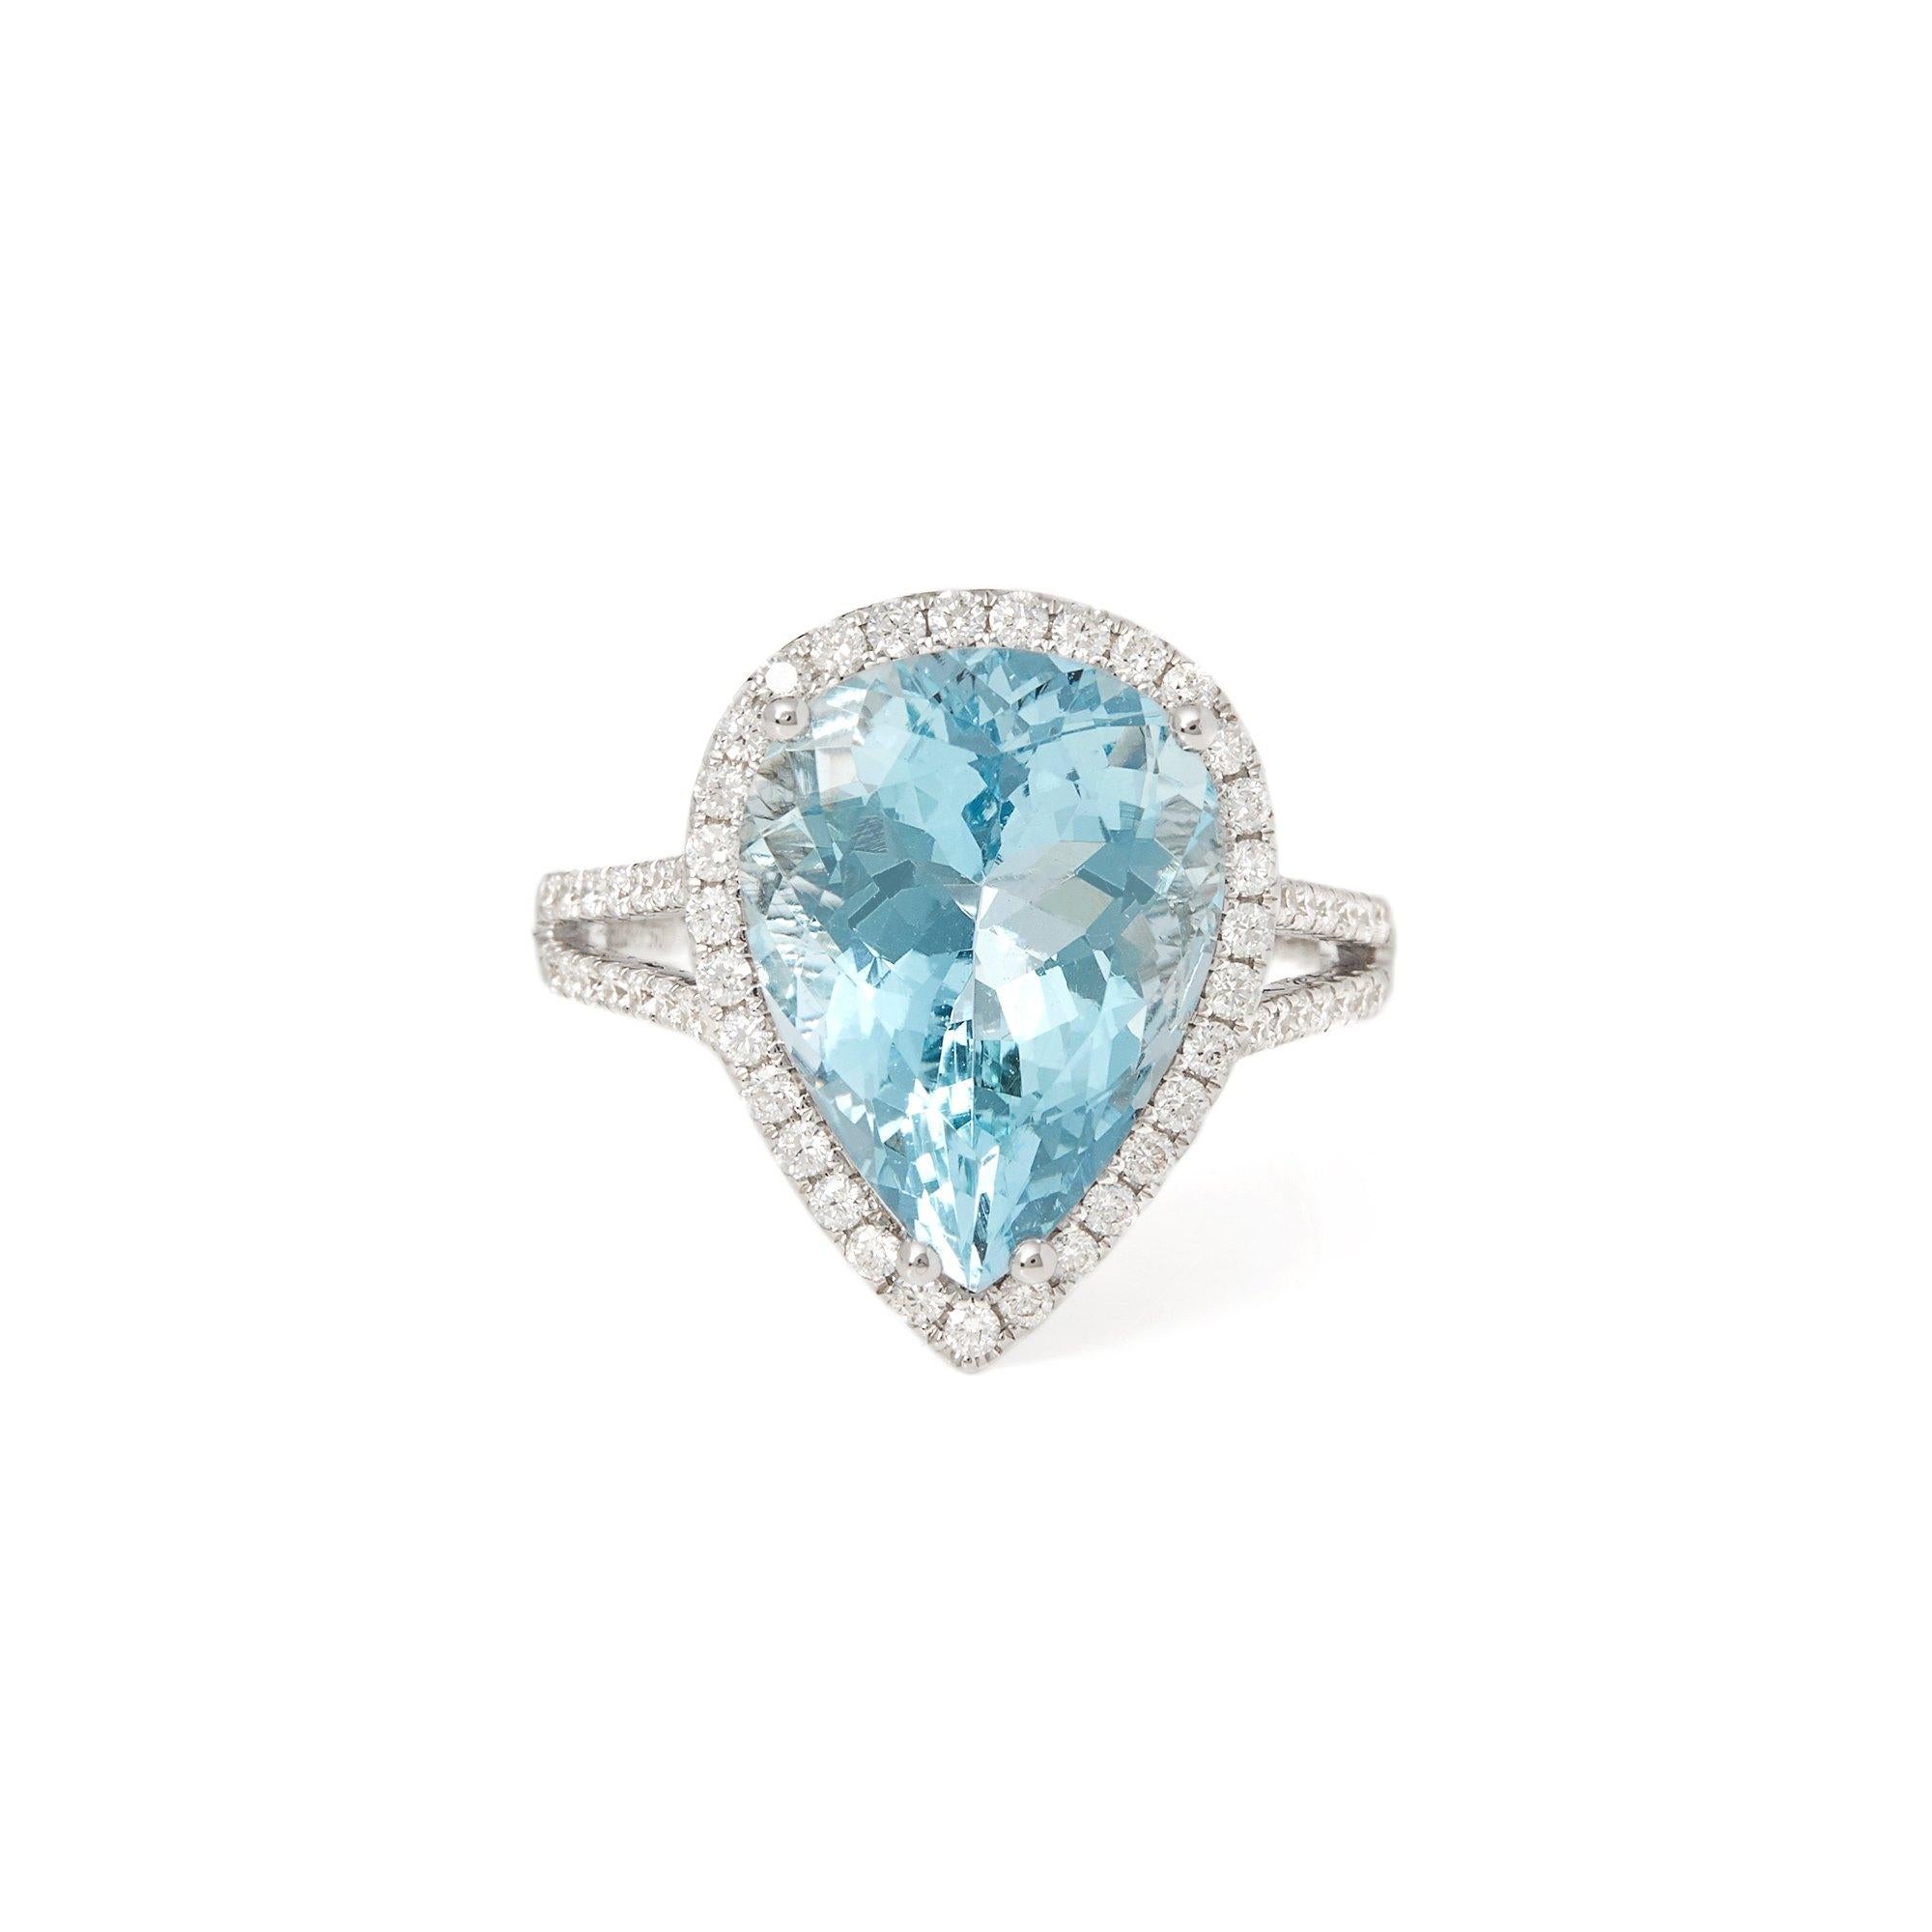 This ring designed by David Jerome is from his private collection and features one pear cut Aquamarine totalling 6.66cts sourced in Brazil. Set with round brilliant cut Diamonds totalling 0.57cts mounted in an 18k white gold setting. UK finger size